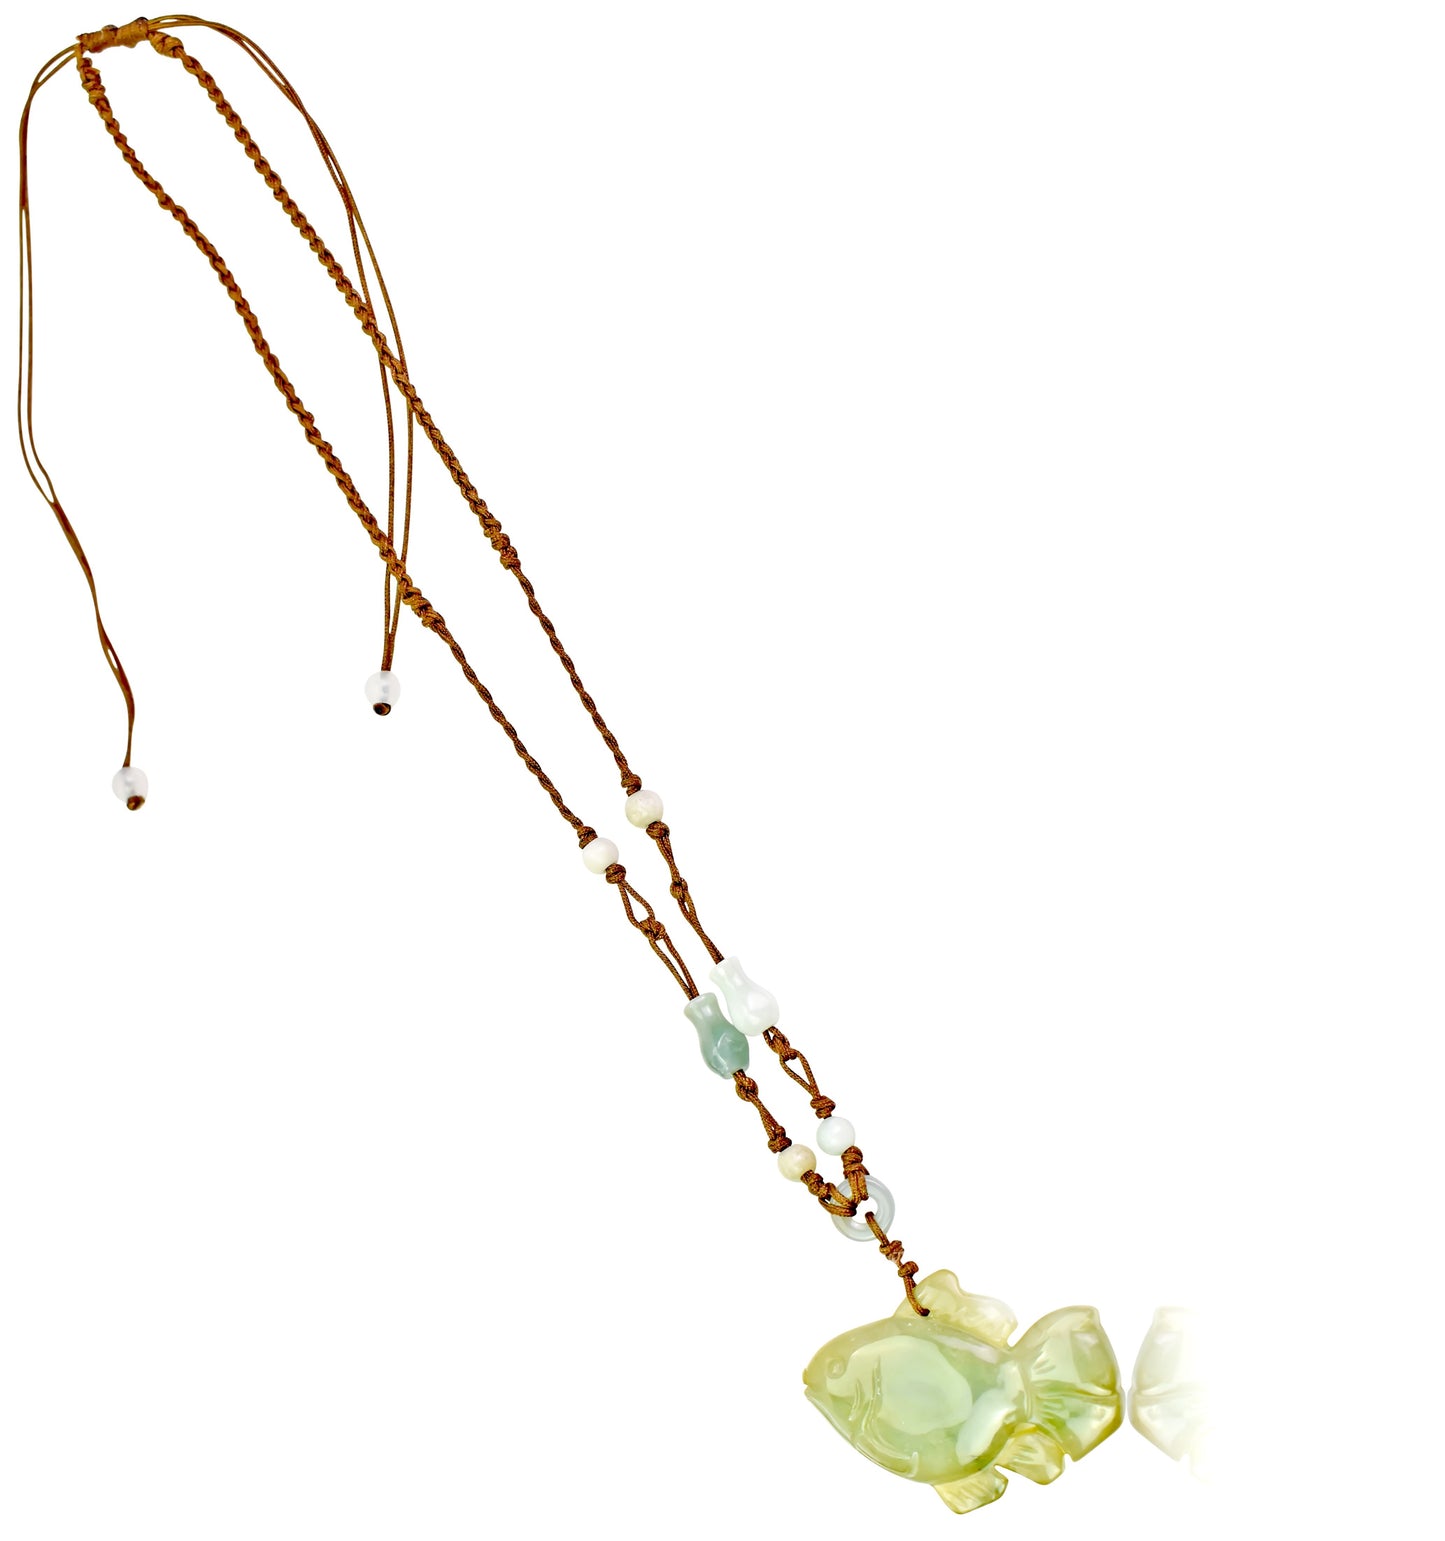 Shine Brightly with Beautiful Topical Fish Jade Necklace